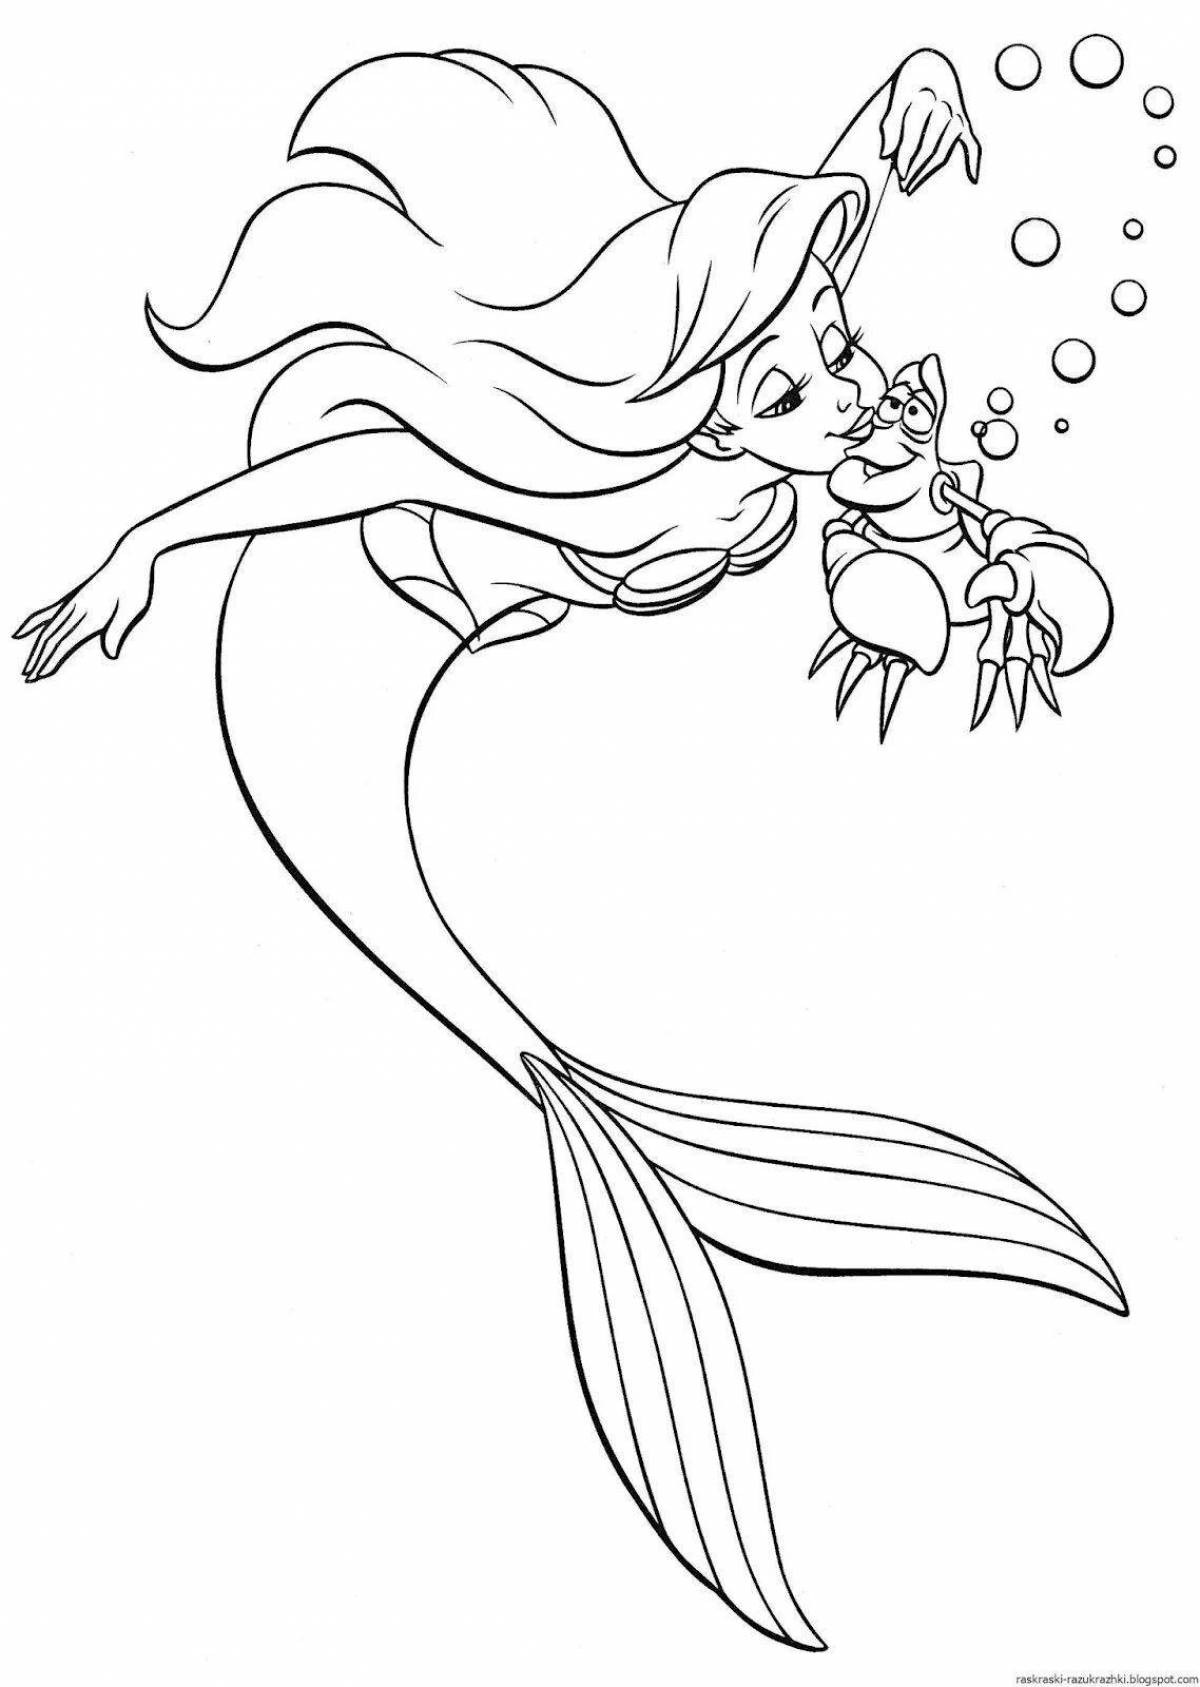 Dazzling little mermaid ariel coloring book for girls